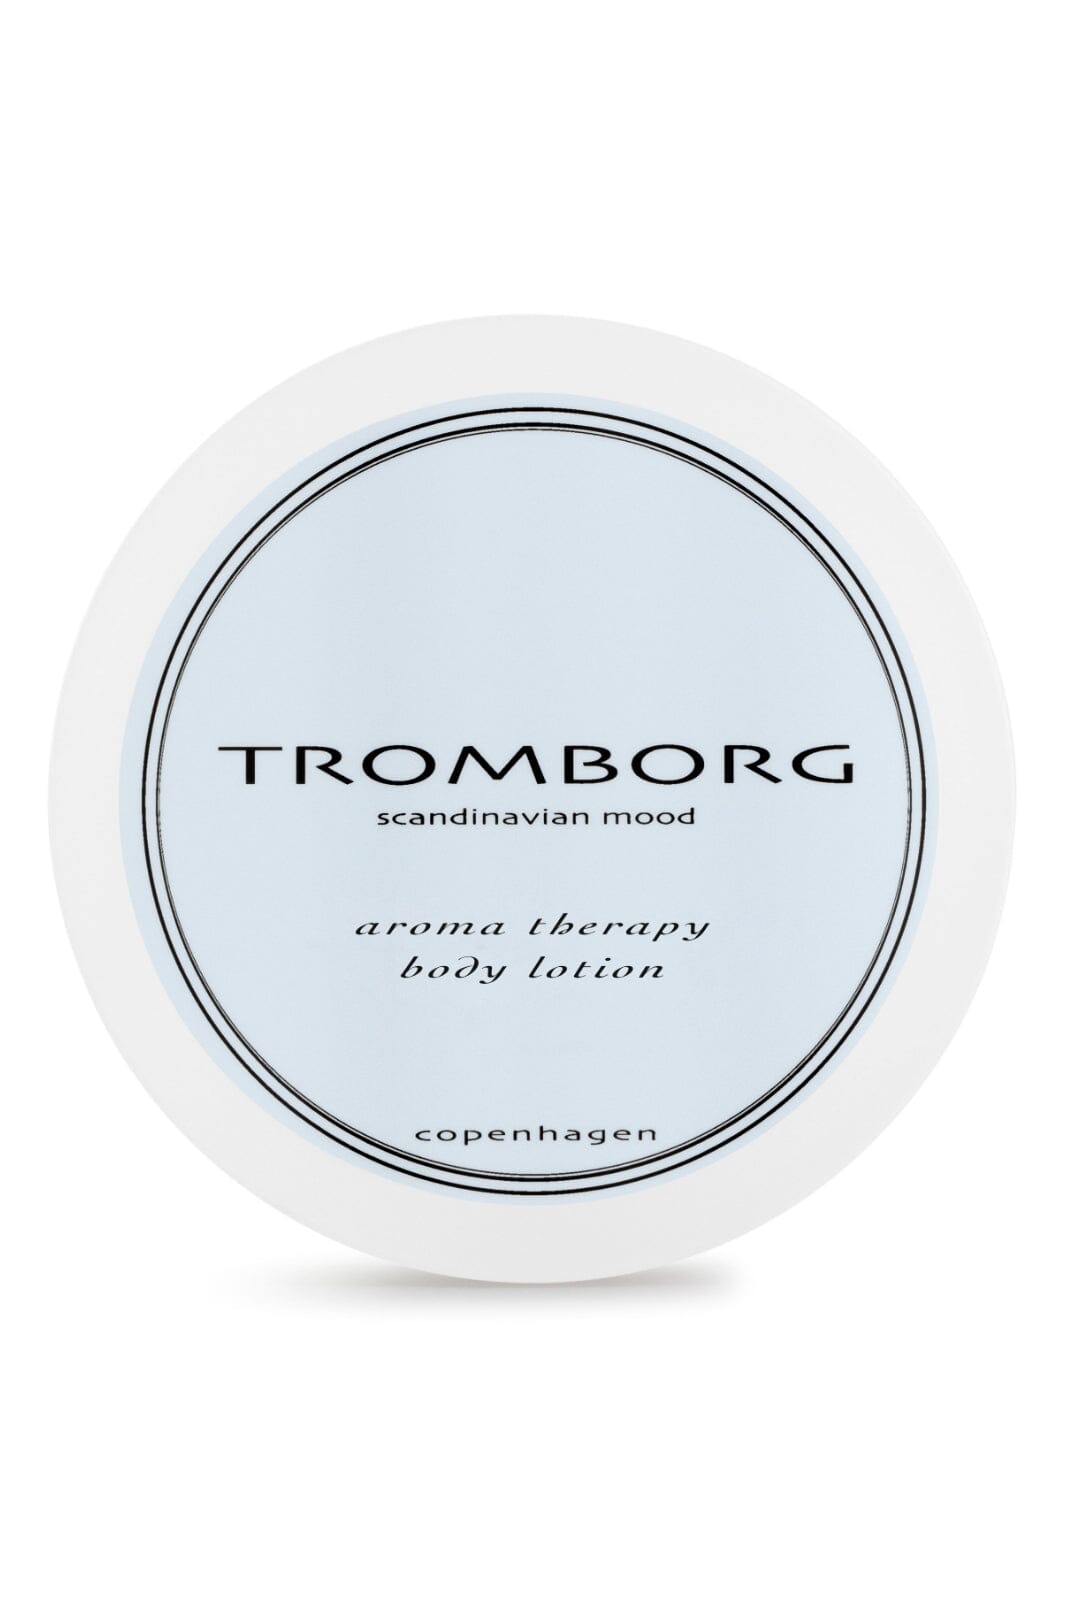 Tromborg - Aroma Therapy Body Lotion Body lotion 